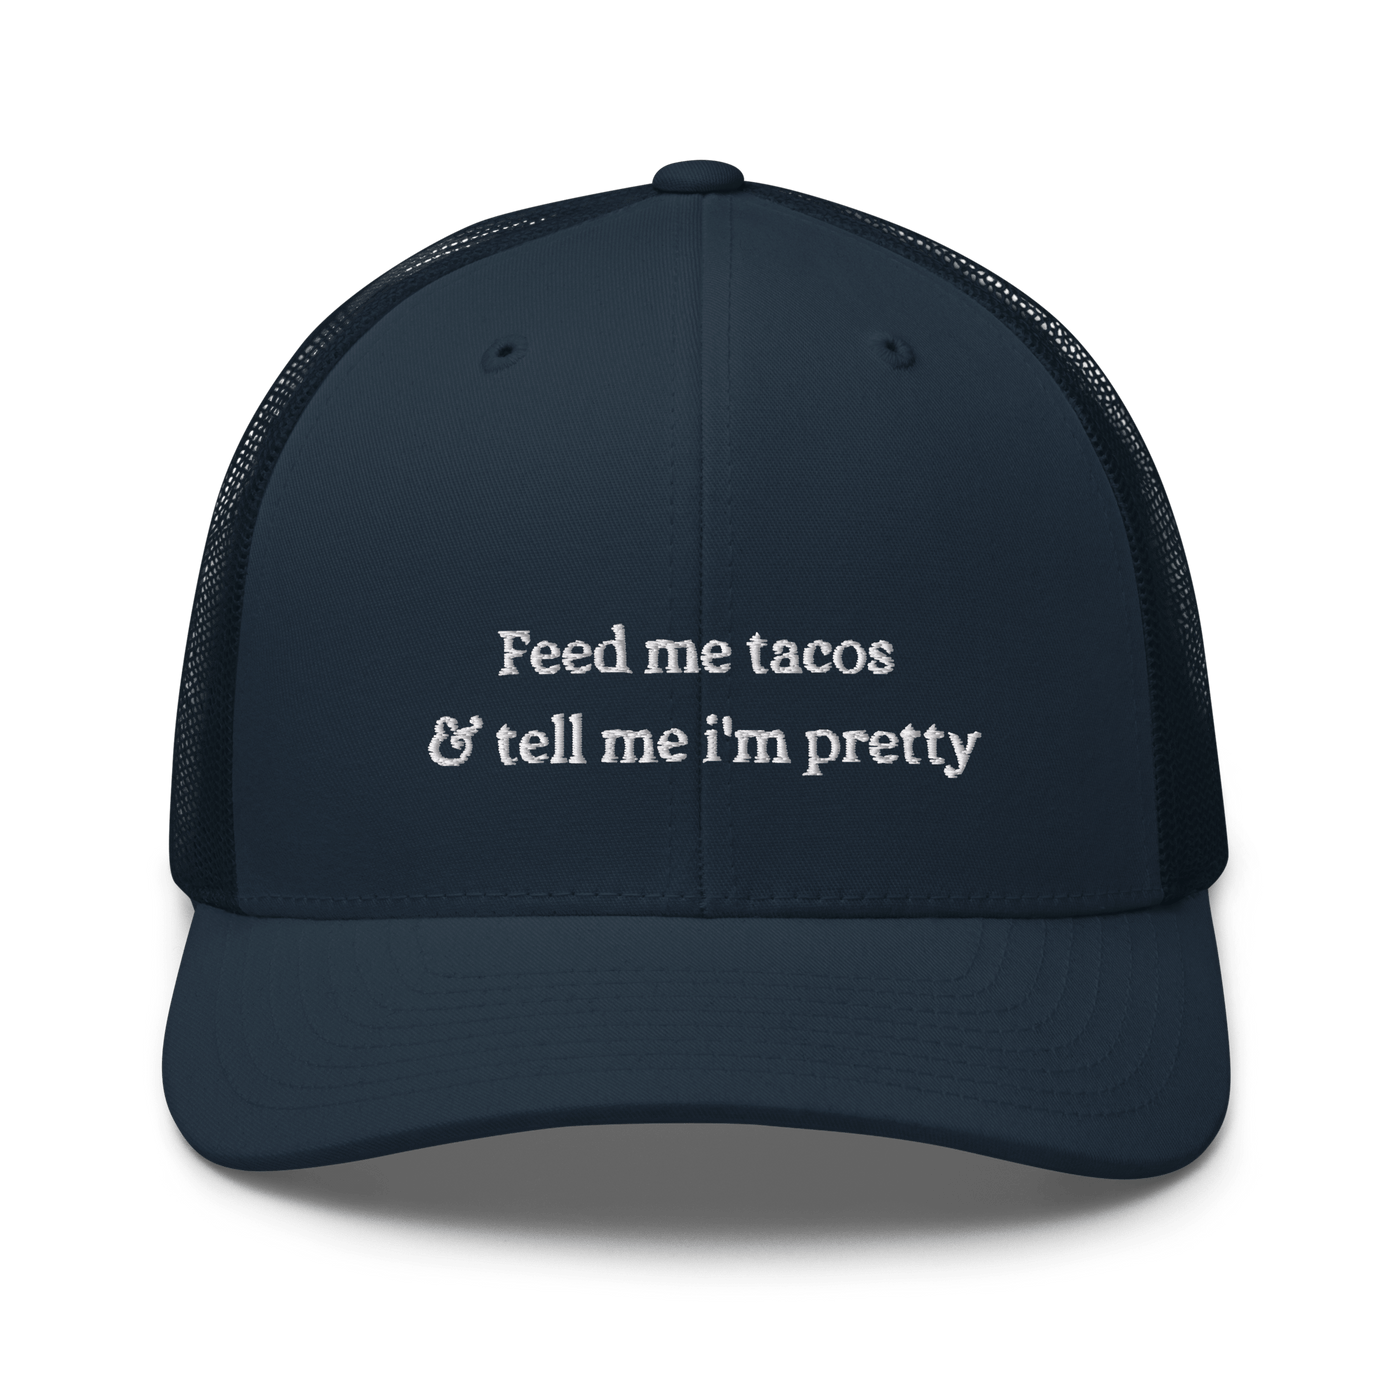 Feed me tacos Trucker Cap - Navy - - Just Another Cap Store